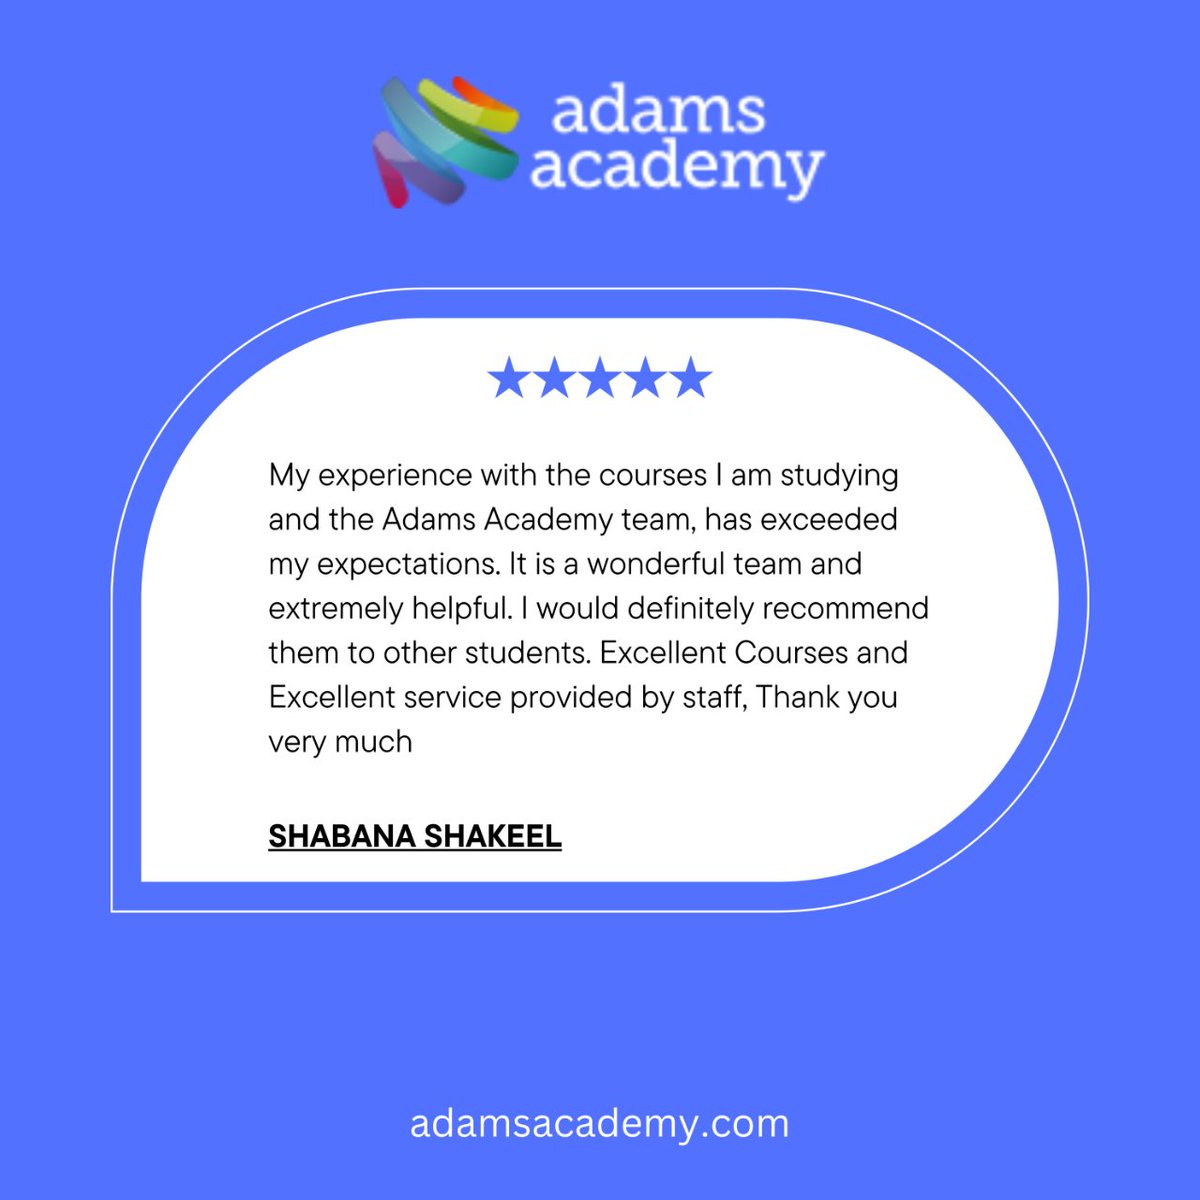 Grateful for your glowing feedback, Shabana! 🌟 Your success is our top priority. Join the community where support and quality education meet—Enroll at Adams Academy today! 
#AdamsAcademy #StudentSuccess #JoinUs